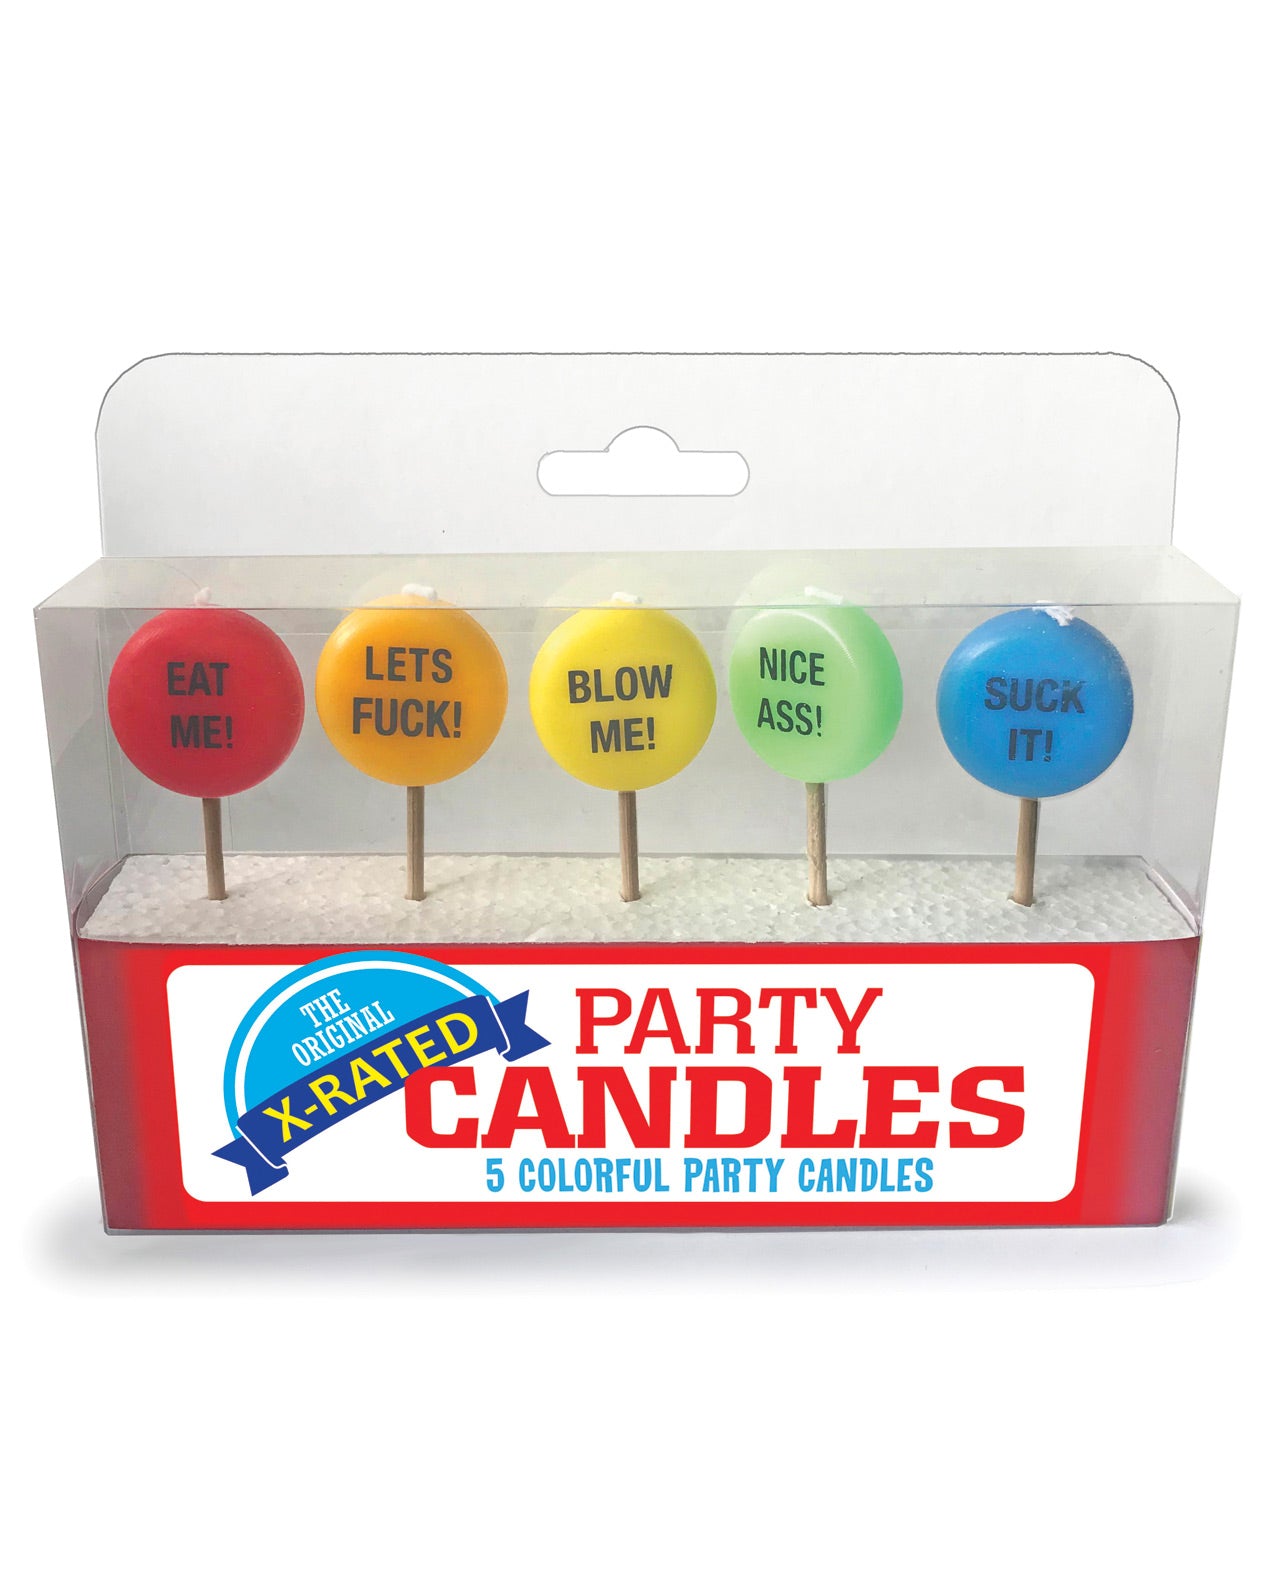 X-Rated Party Candles - Set of 5